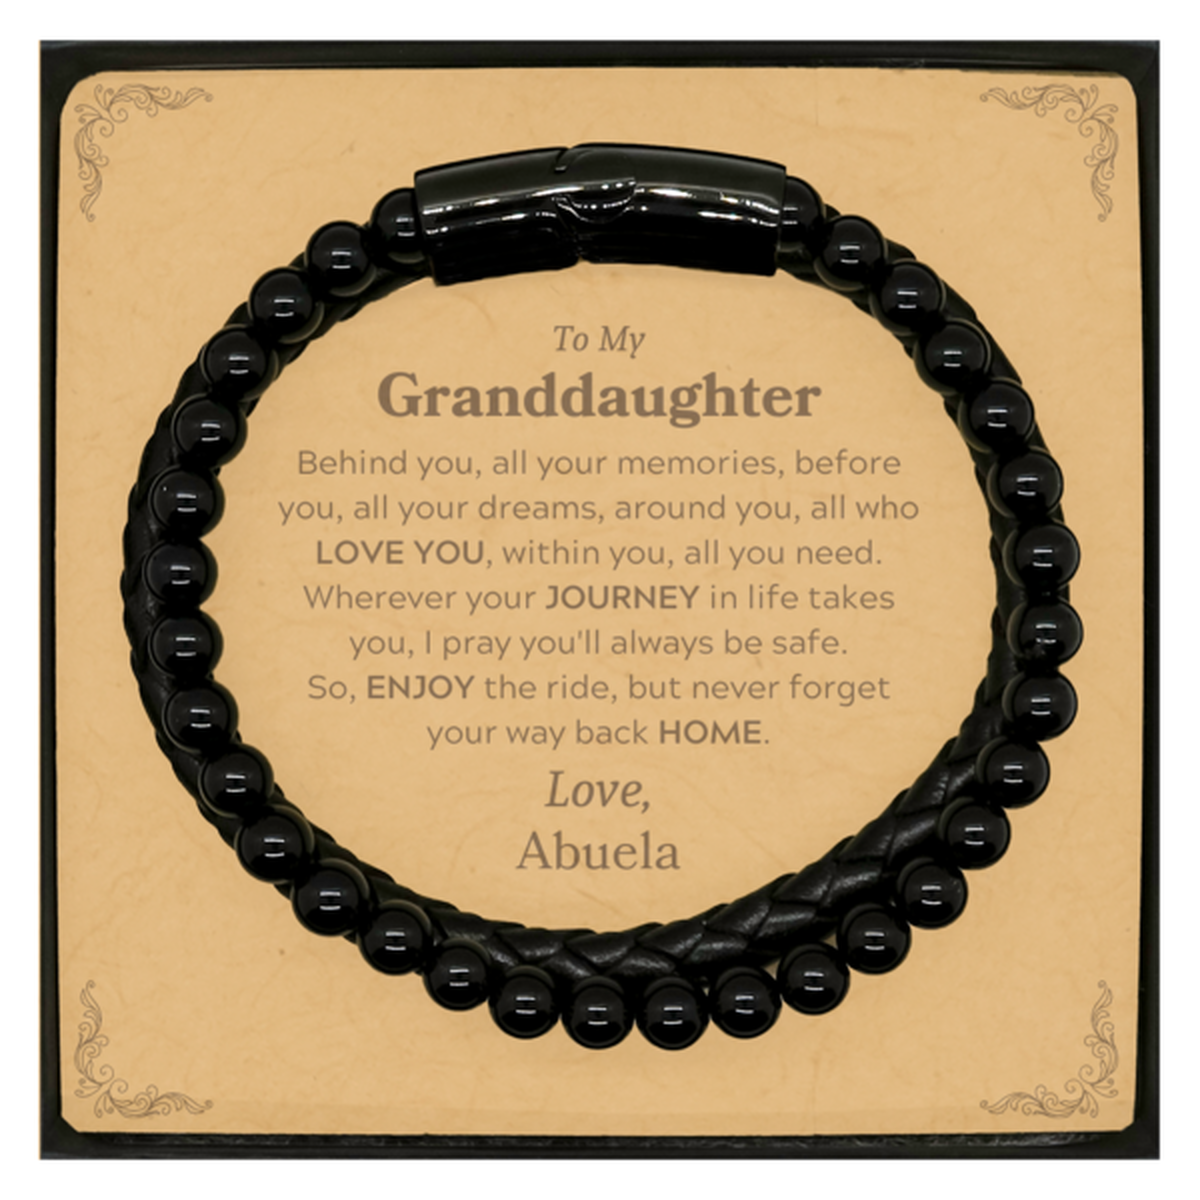 To My Granddaughter Graduation Gifts from Abuela, Granddaughter Stone Leather Bracelets Christmas Birthday Gifts for Granddaughter Behind you, all your memories, before you, all your dreams. Love, Abuela